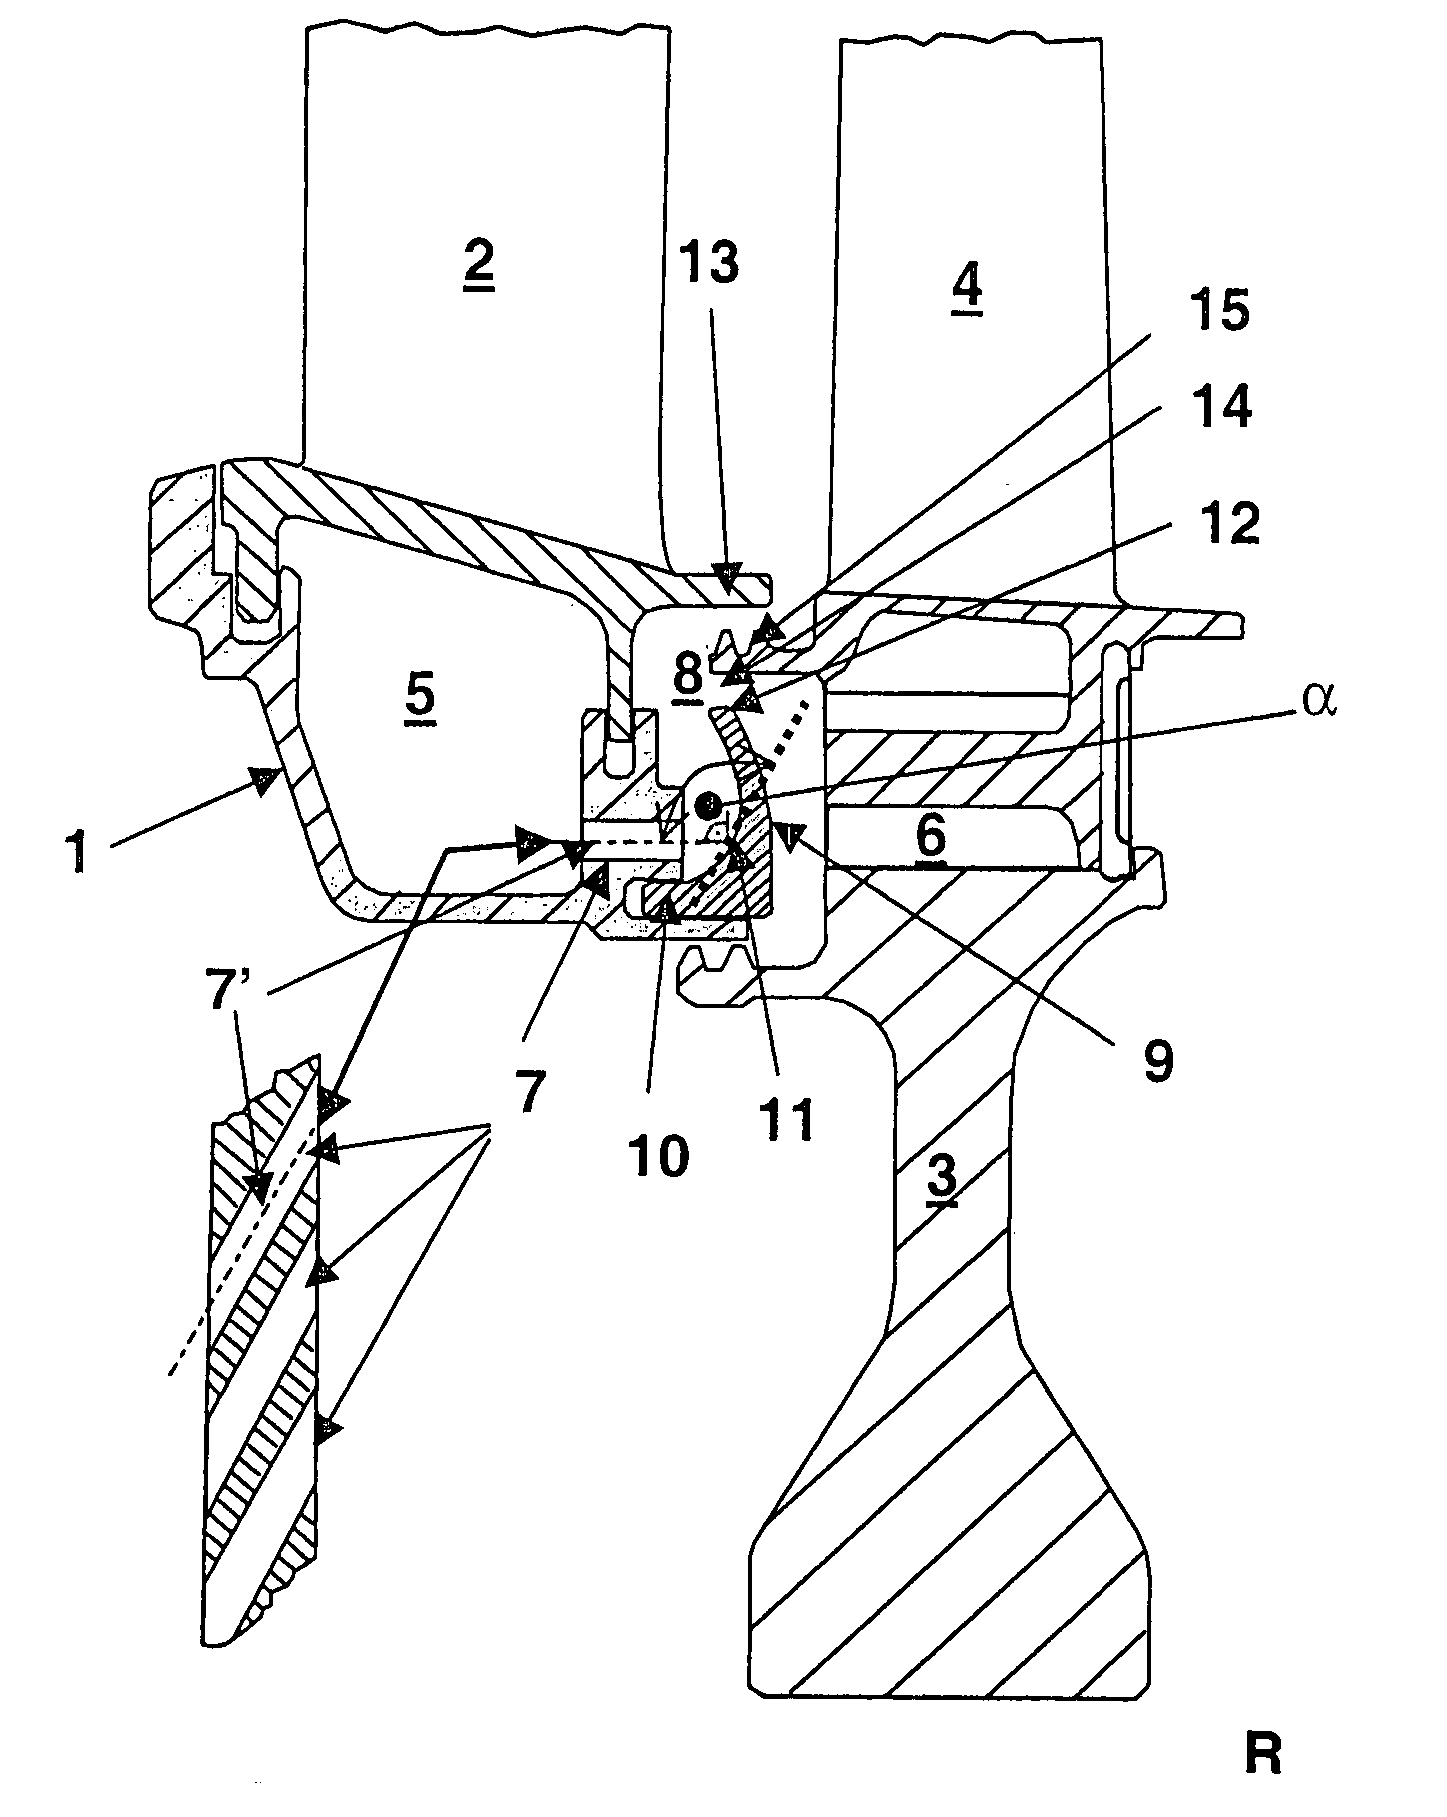 Device for separating foreign particles out of the cooling air that can be fed to the rotor blades of a turbine